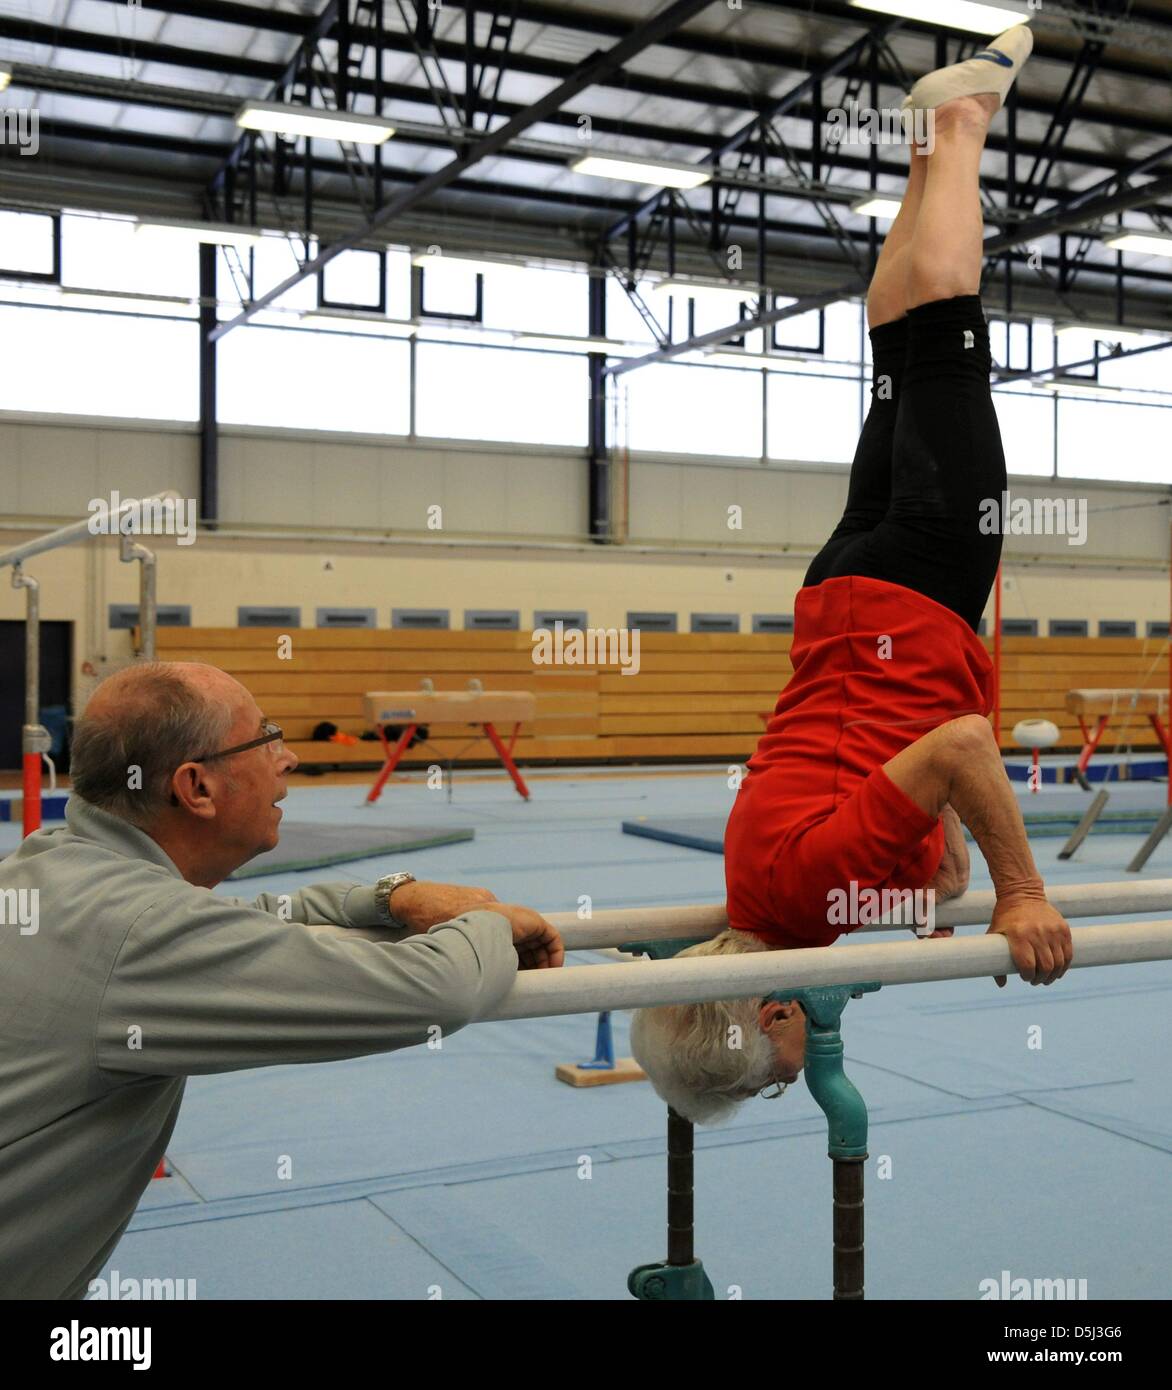 86-year-old Johanna Quaas, the world's oldest gymnast, is supported by her husband,former gymnast trainer Gerhard Quaas, during her weekly training on the bars in Halle, Germany, 06 November 2012. The agile gymnast, whose birthday is on 20 November, does sport acitivities every day and still participates in competitions. As the oldest active gymnast, she is listed in the Guinness B Stock Photo